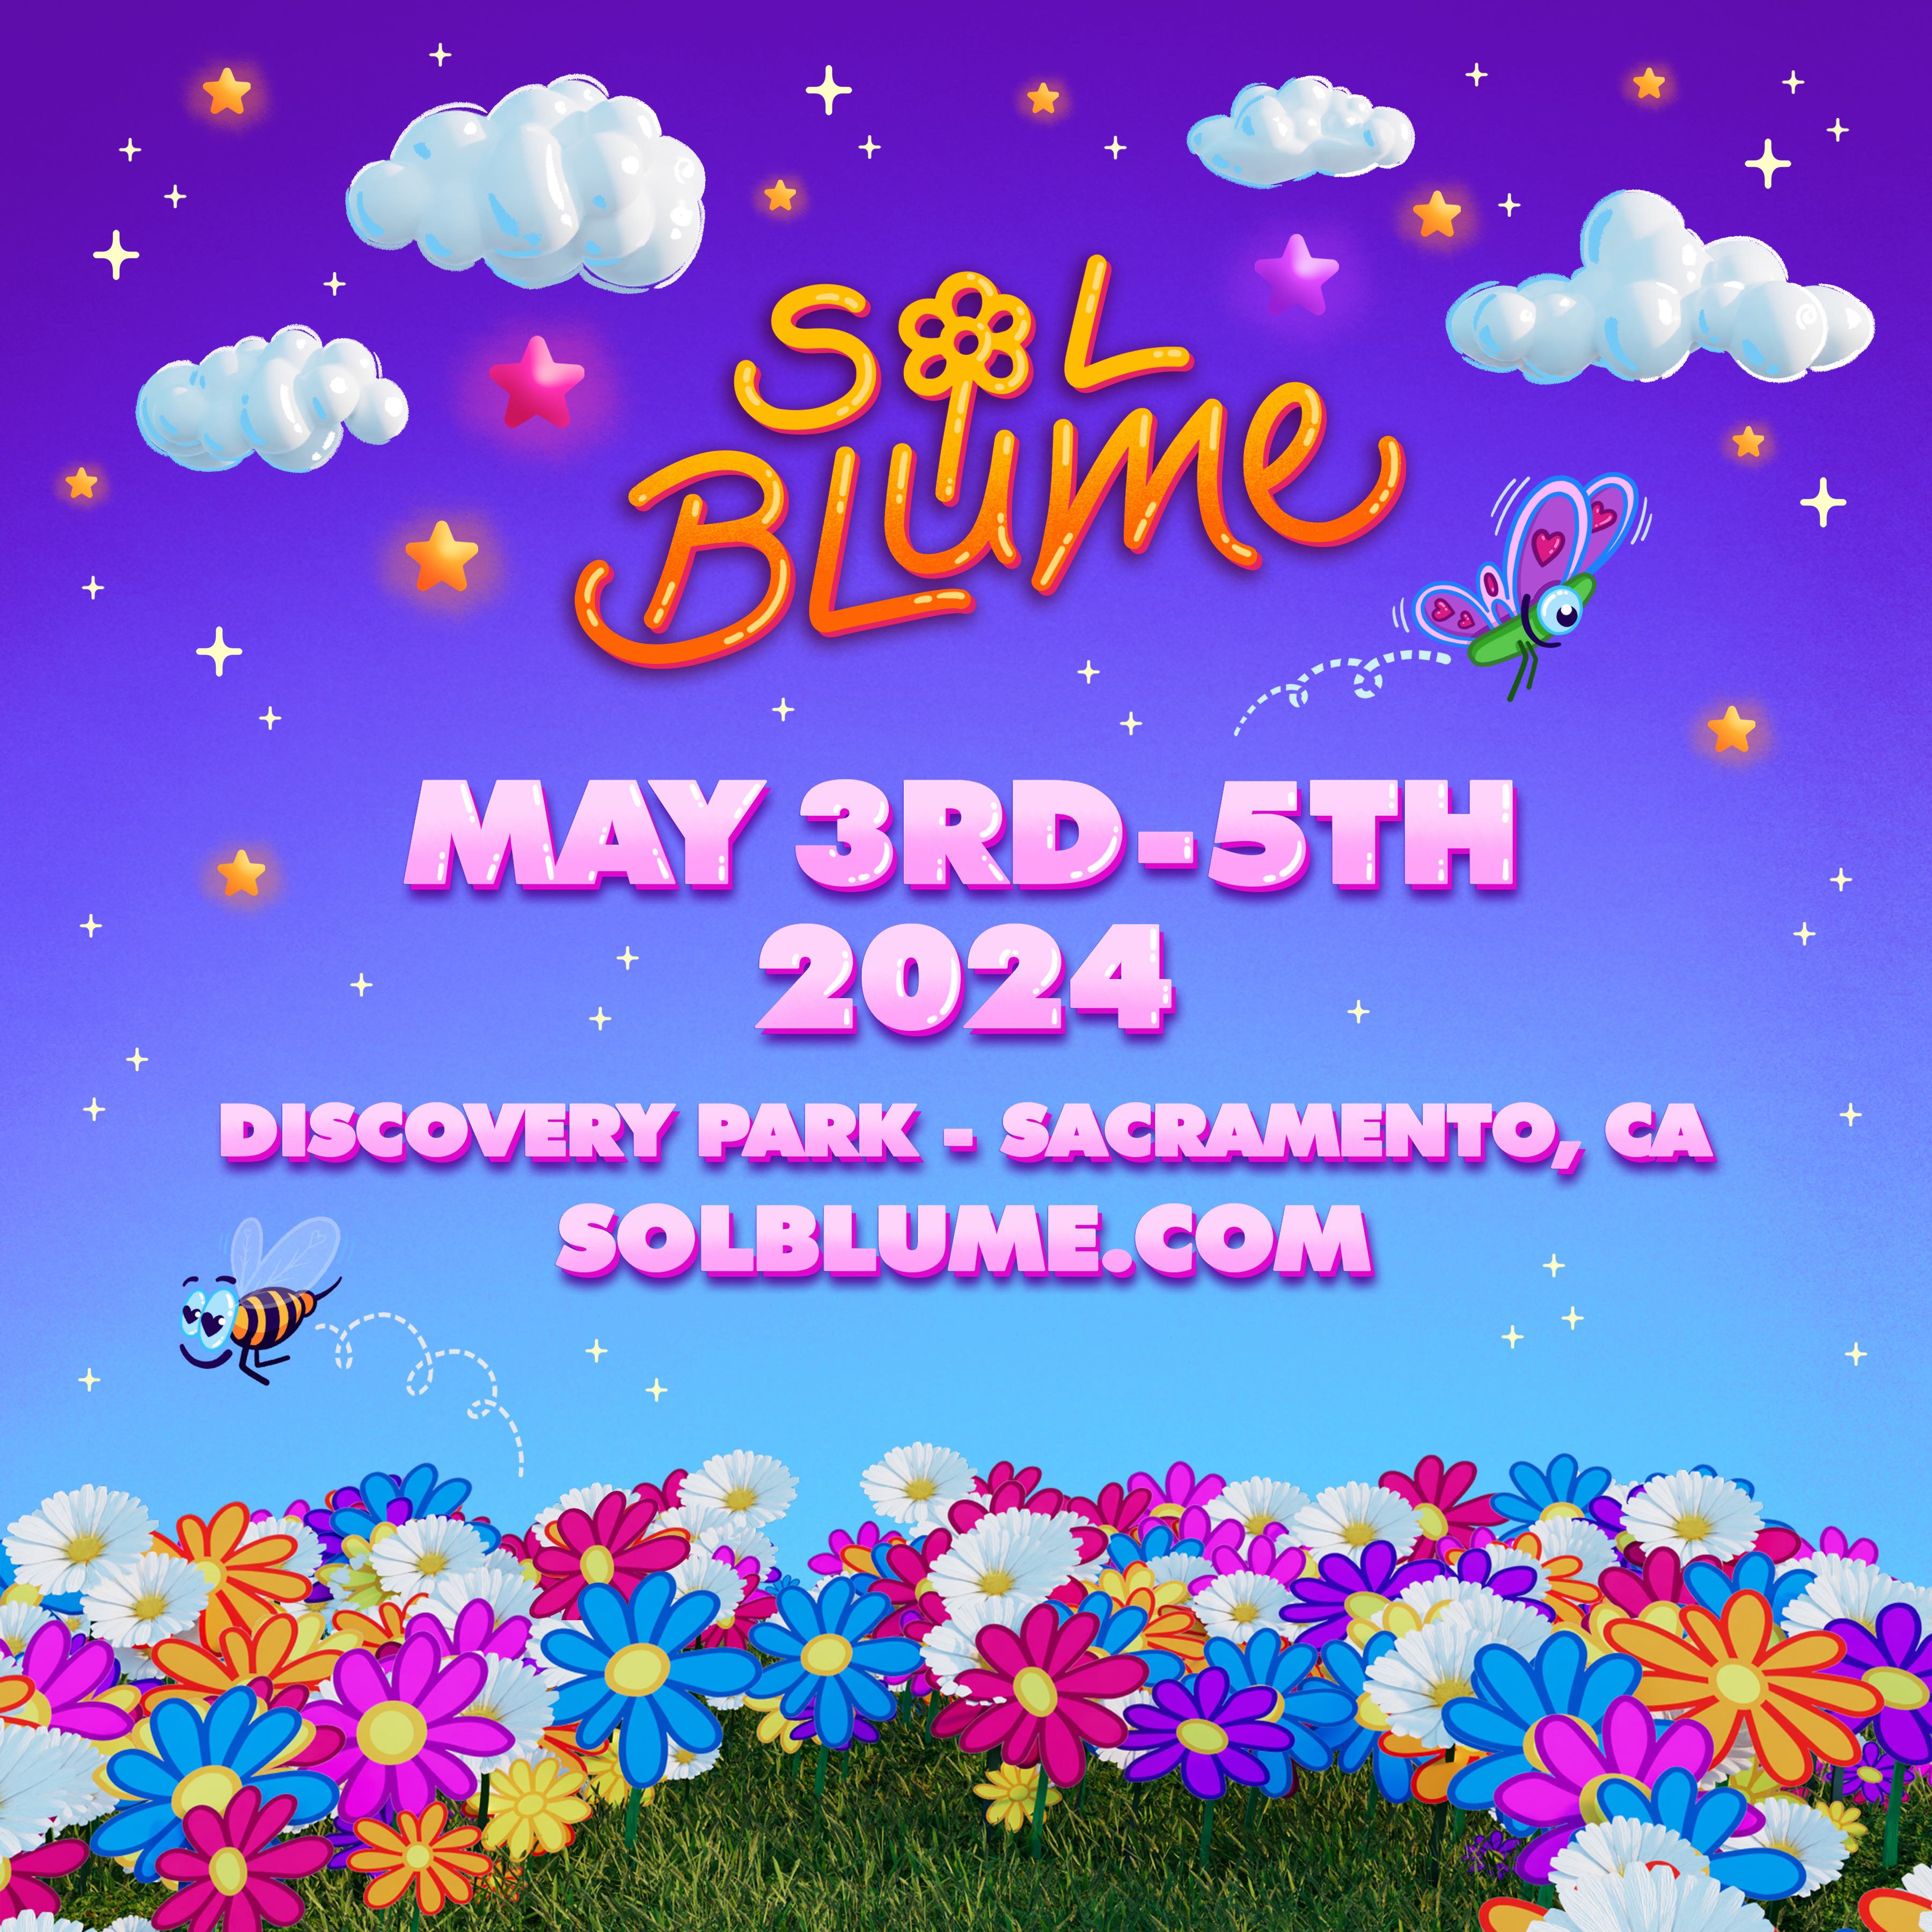 SOL BLUME MUSIC FESTIVAL ANNOUNCES 2024 DATES WITH EXPANSION TO THREE DAYS 